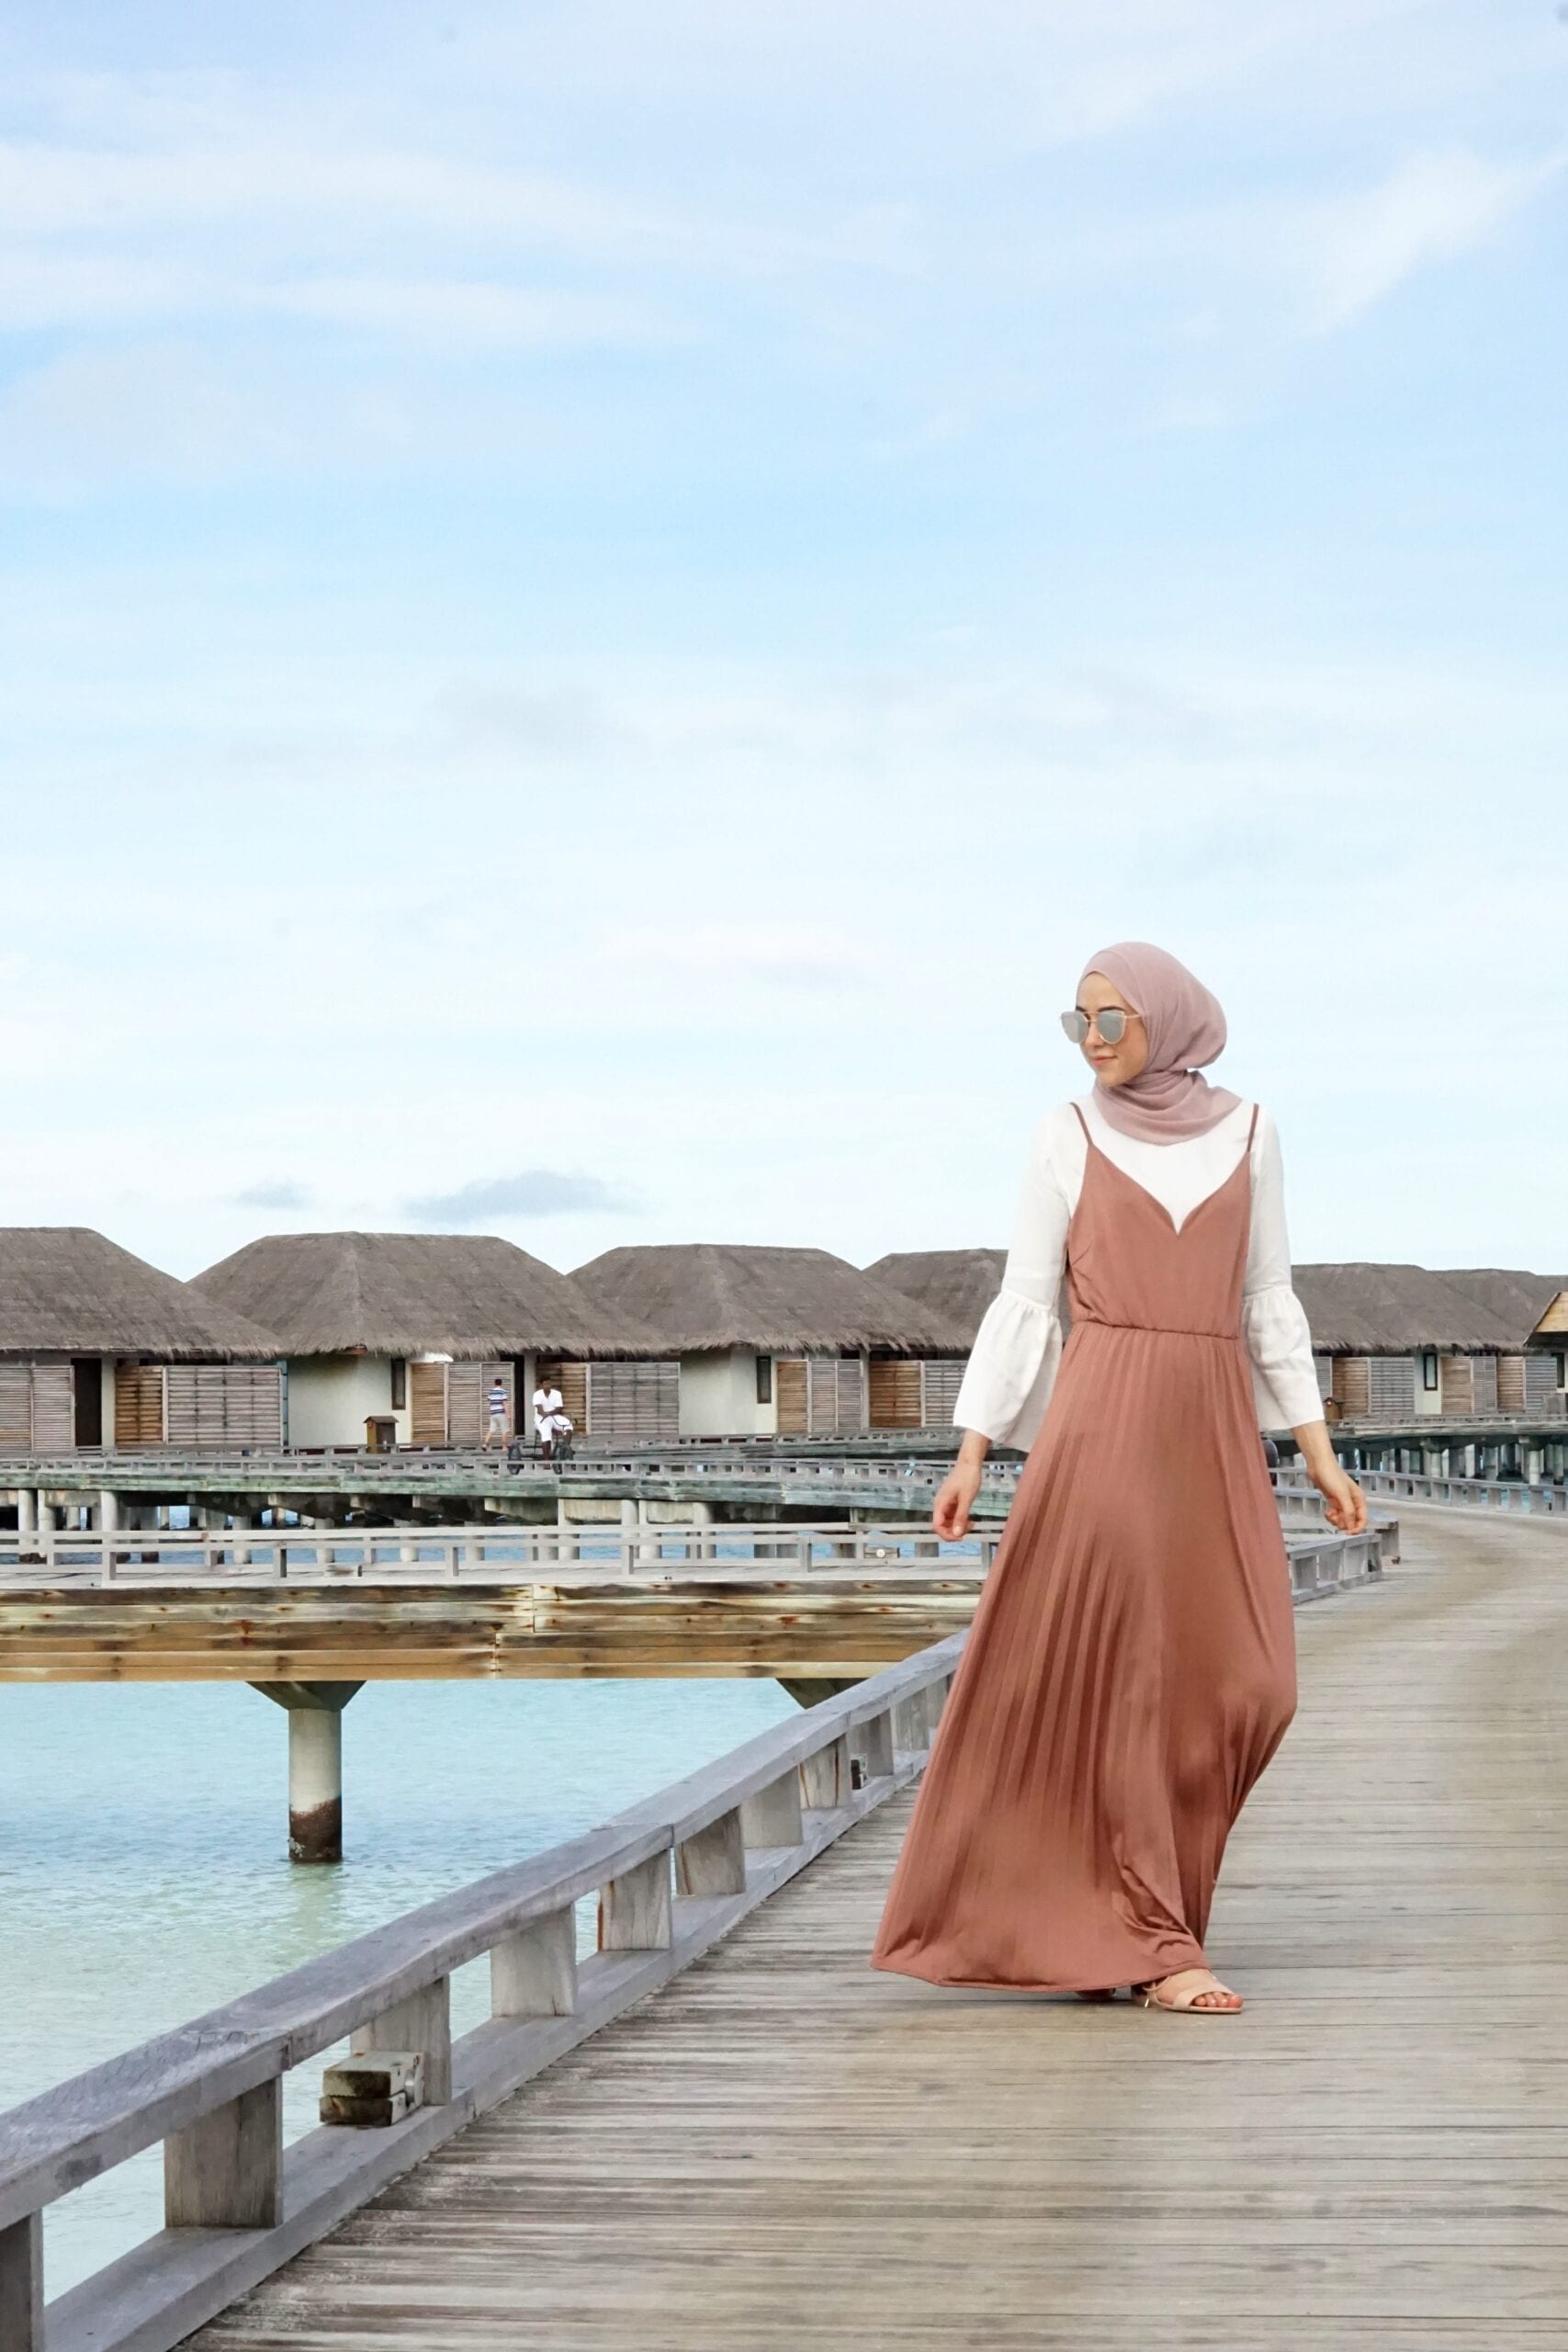 19 Modest Hijab Outfits for Honeymoon for Muslim Couples